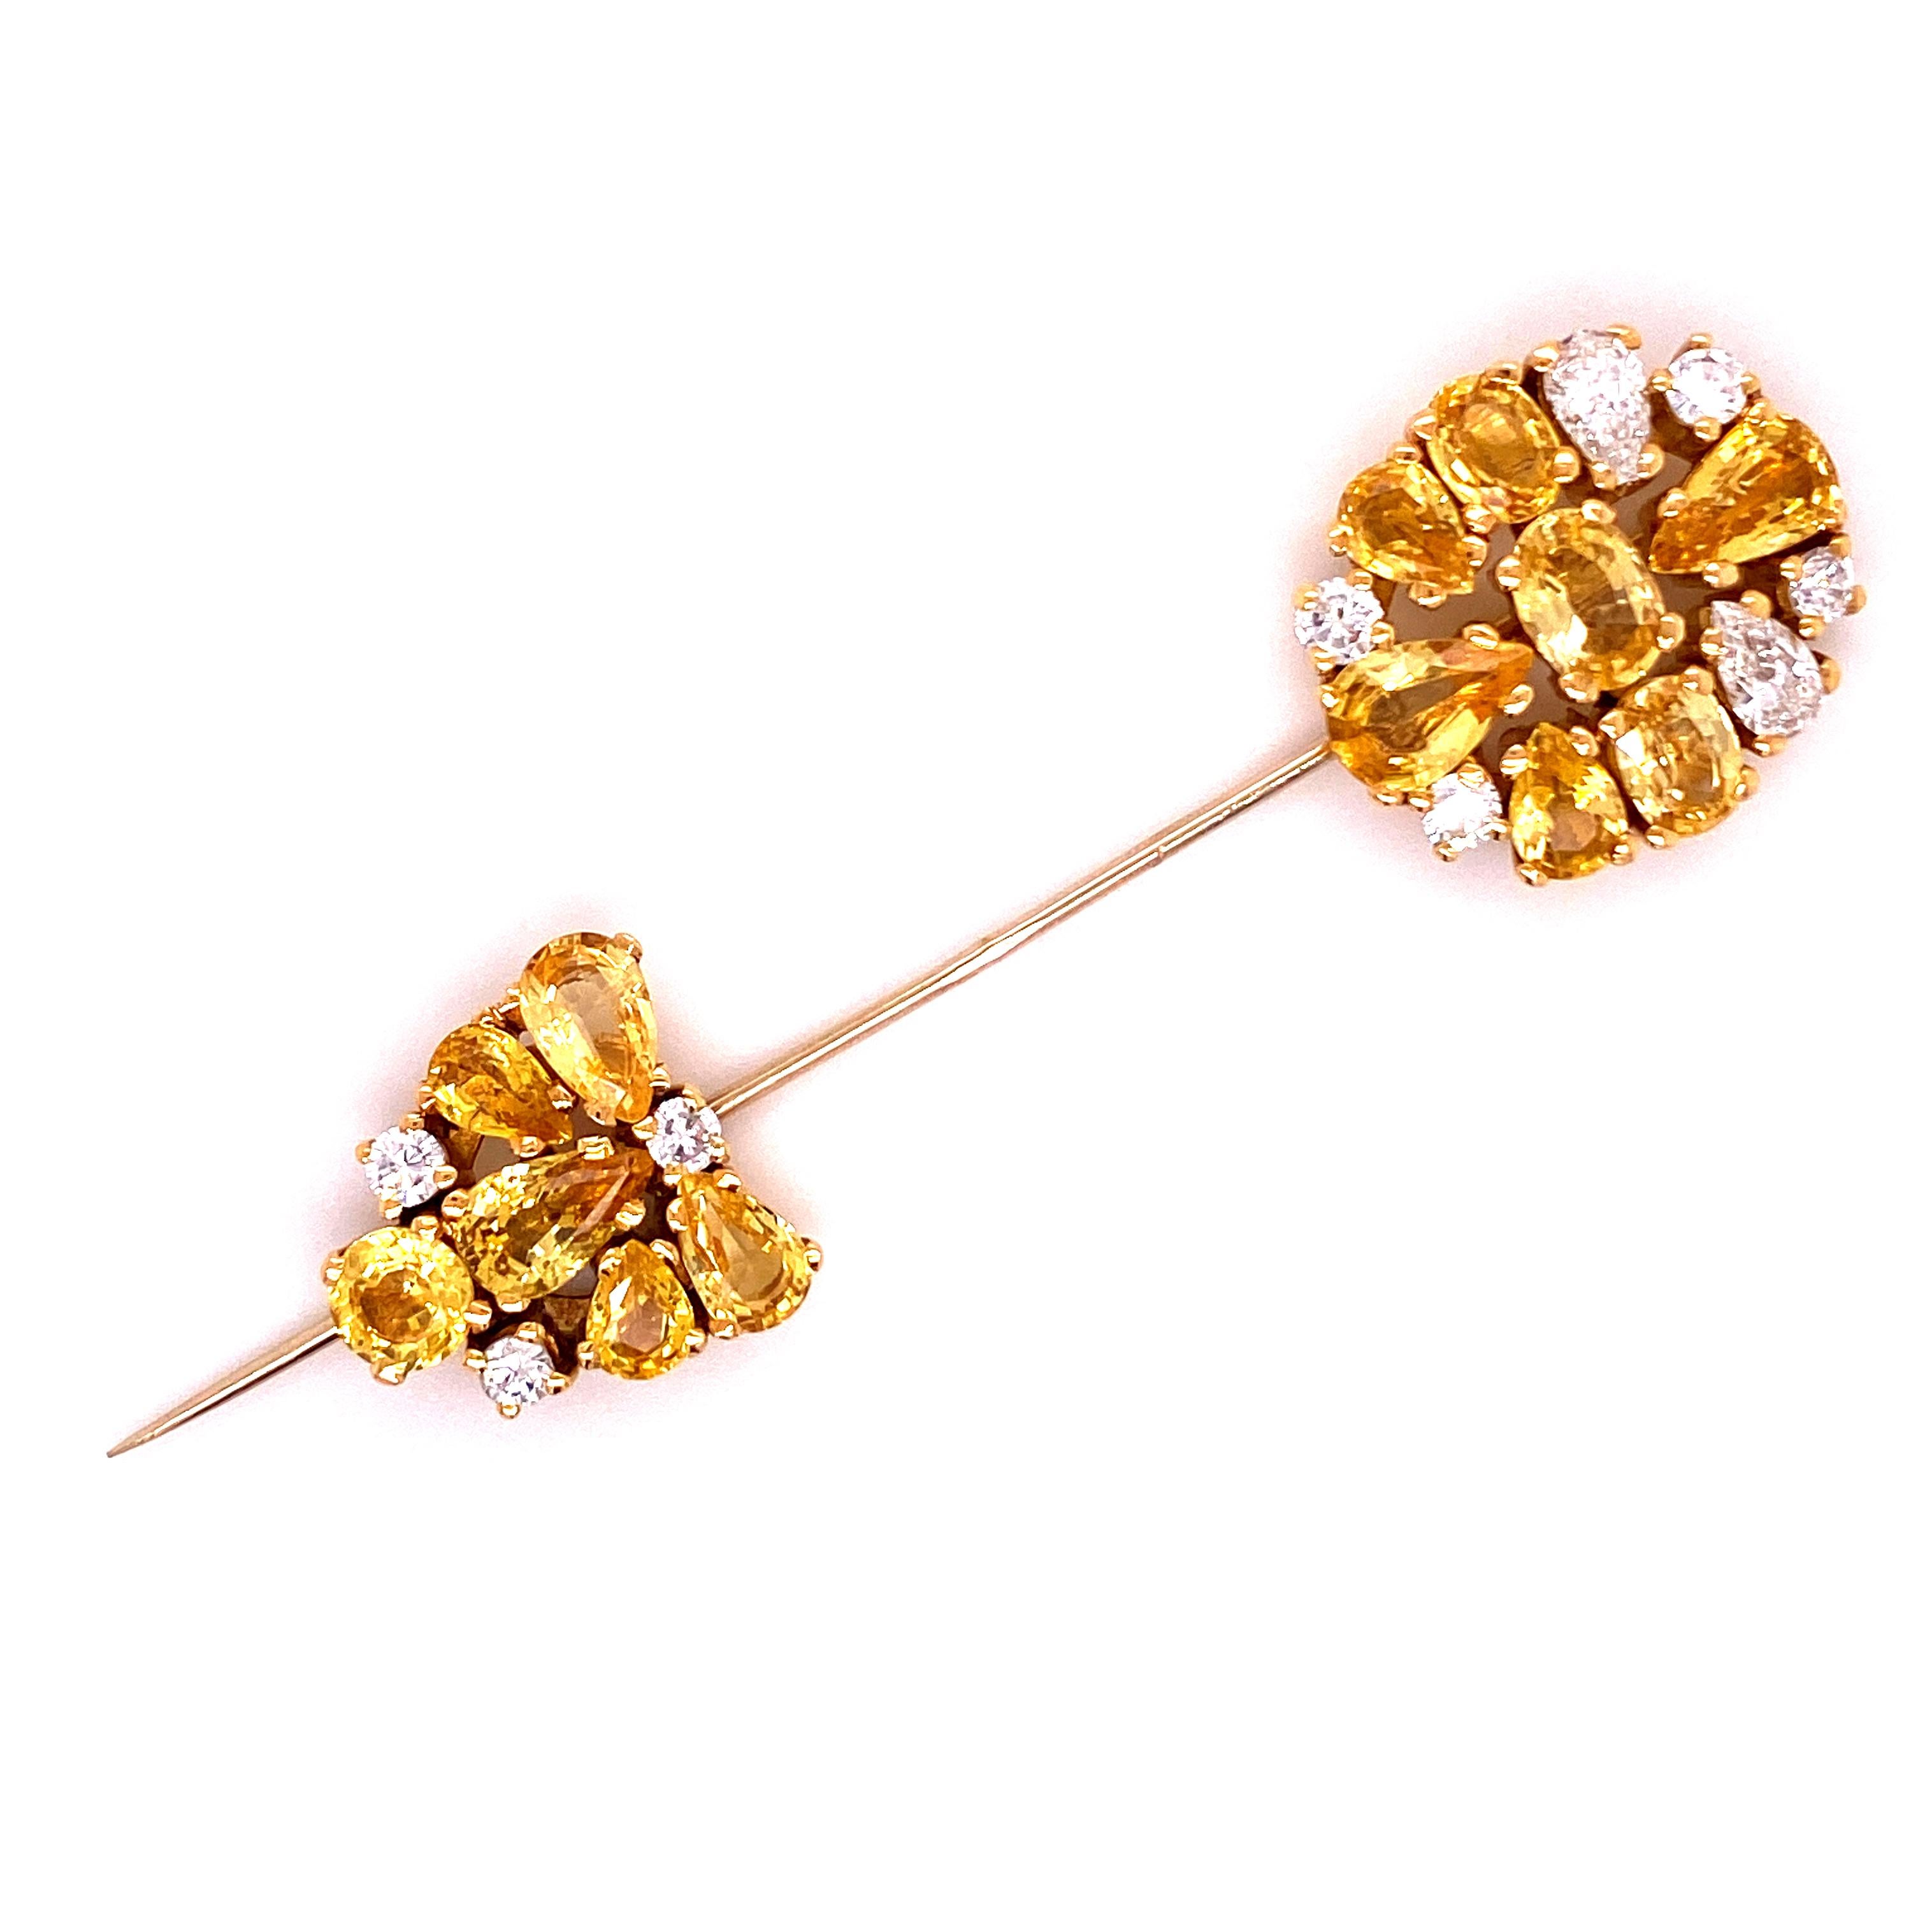 This pin is the perfect companion for a festive appearance. The different cuts of the yellow sapphires and diamonds are beautifully arranged - they harmonize perfectly with the yellow gold setting which is worked in 18 k yellow gold. 13 yellow